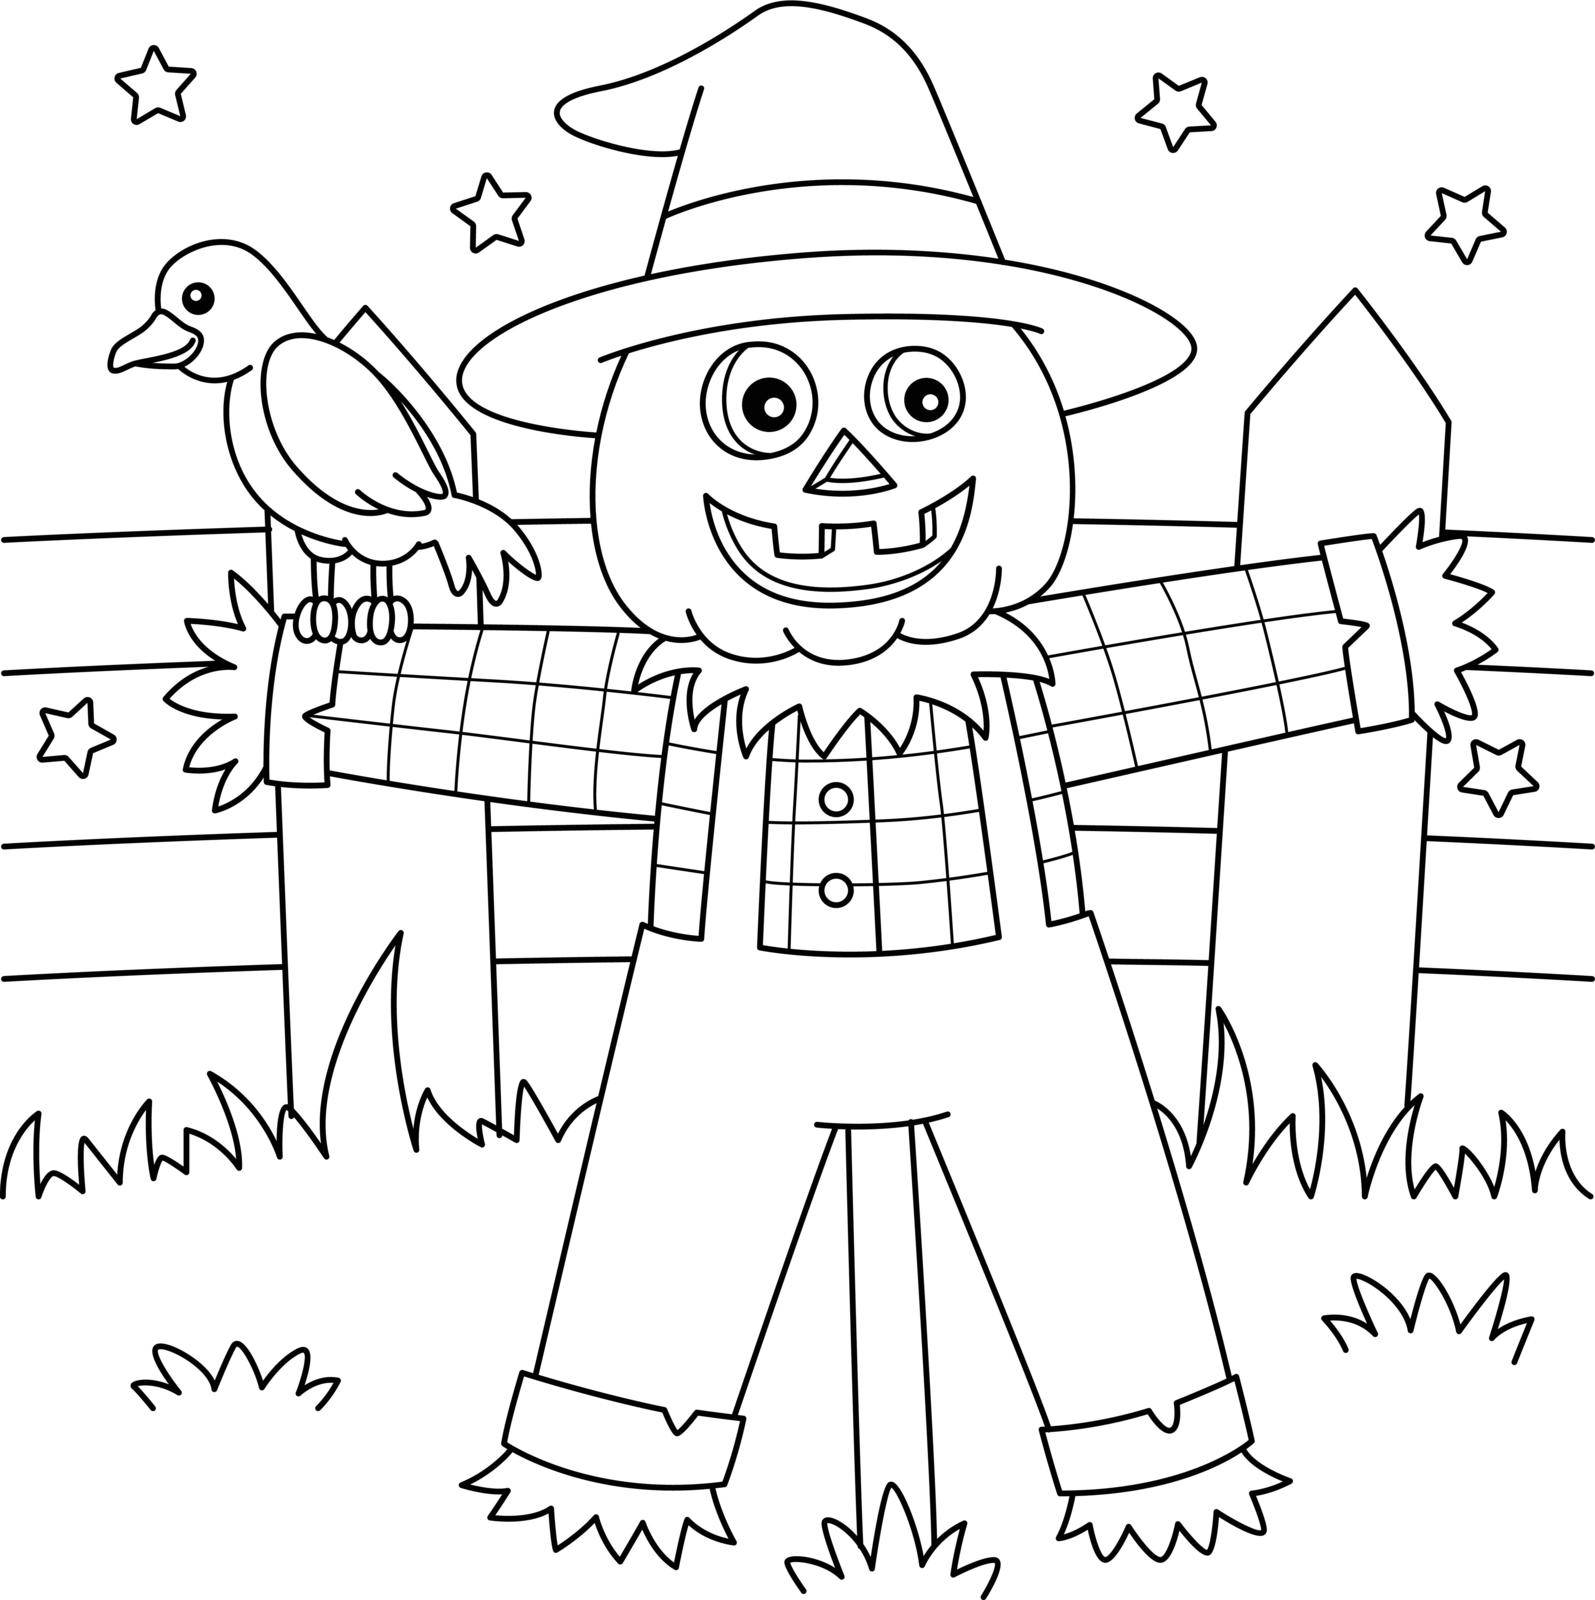 A cute and funny coloring page of a scarecrow Halloween. Provides hours of coloring fun for children. To color, this page is very easy. Suitable for little kids and toddlers.